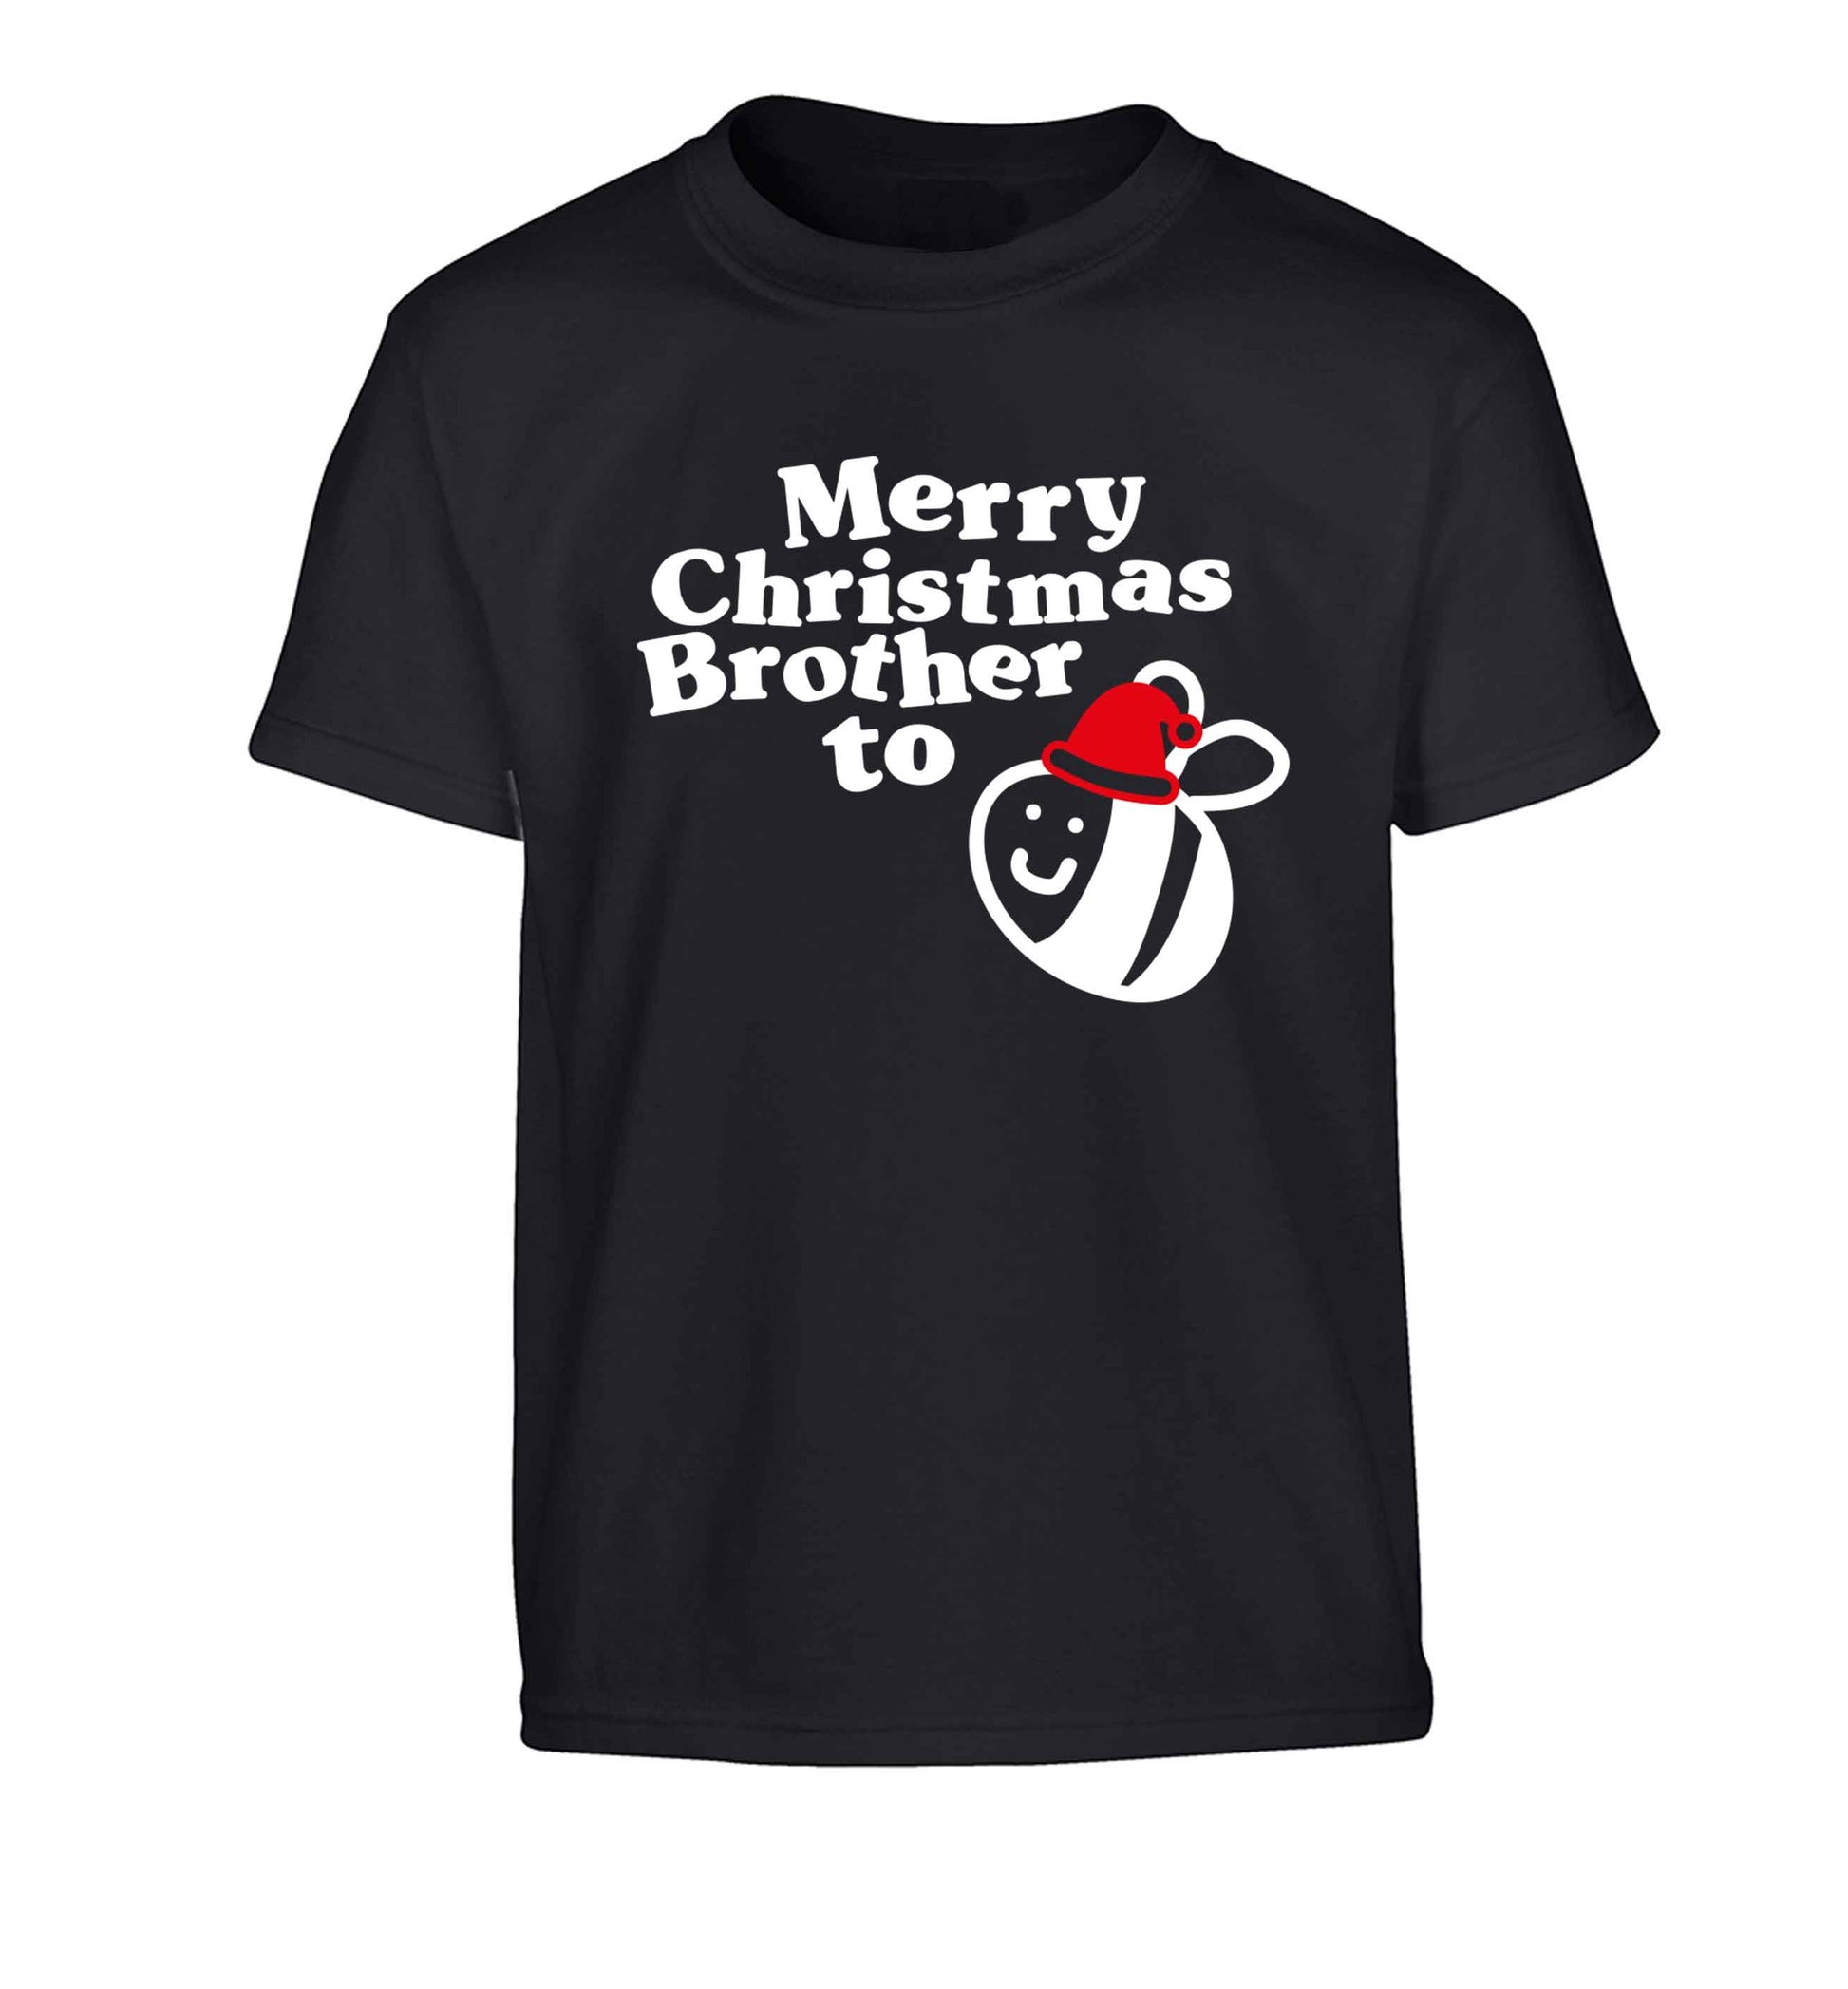 Merry Christmas brother to be Children's black Tshirt 12-13 Years